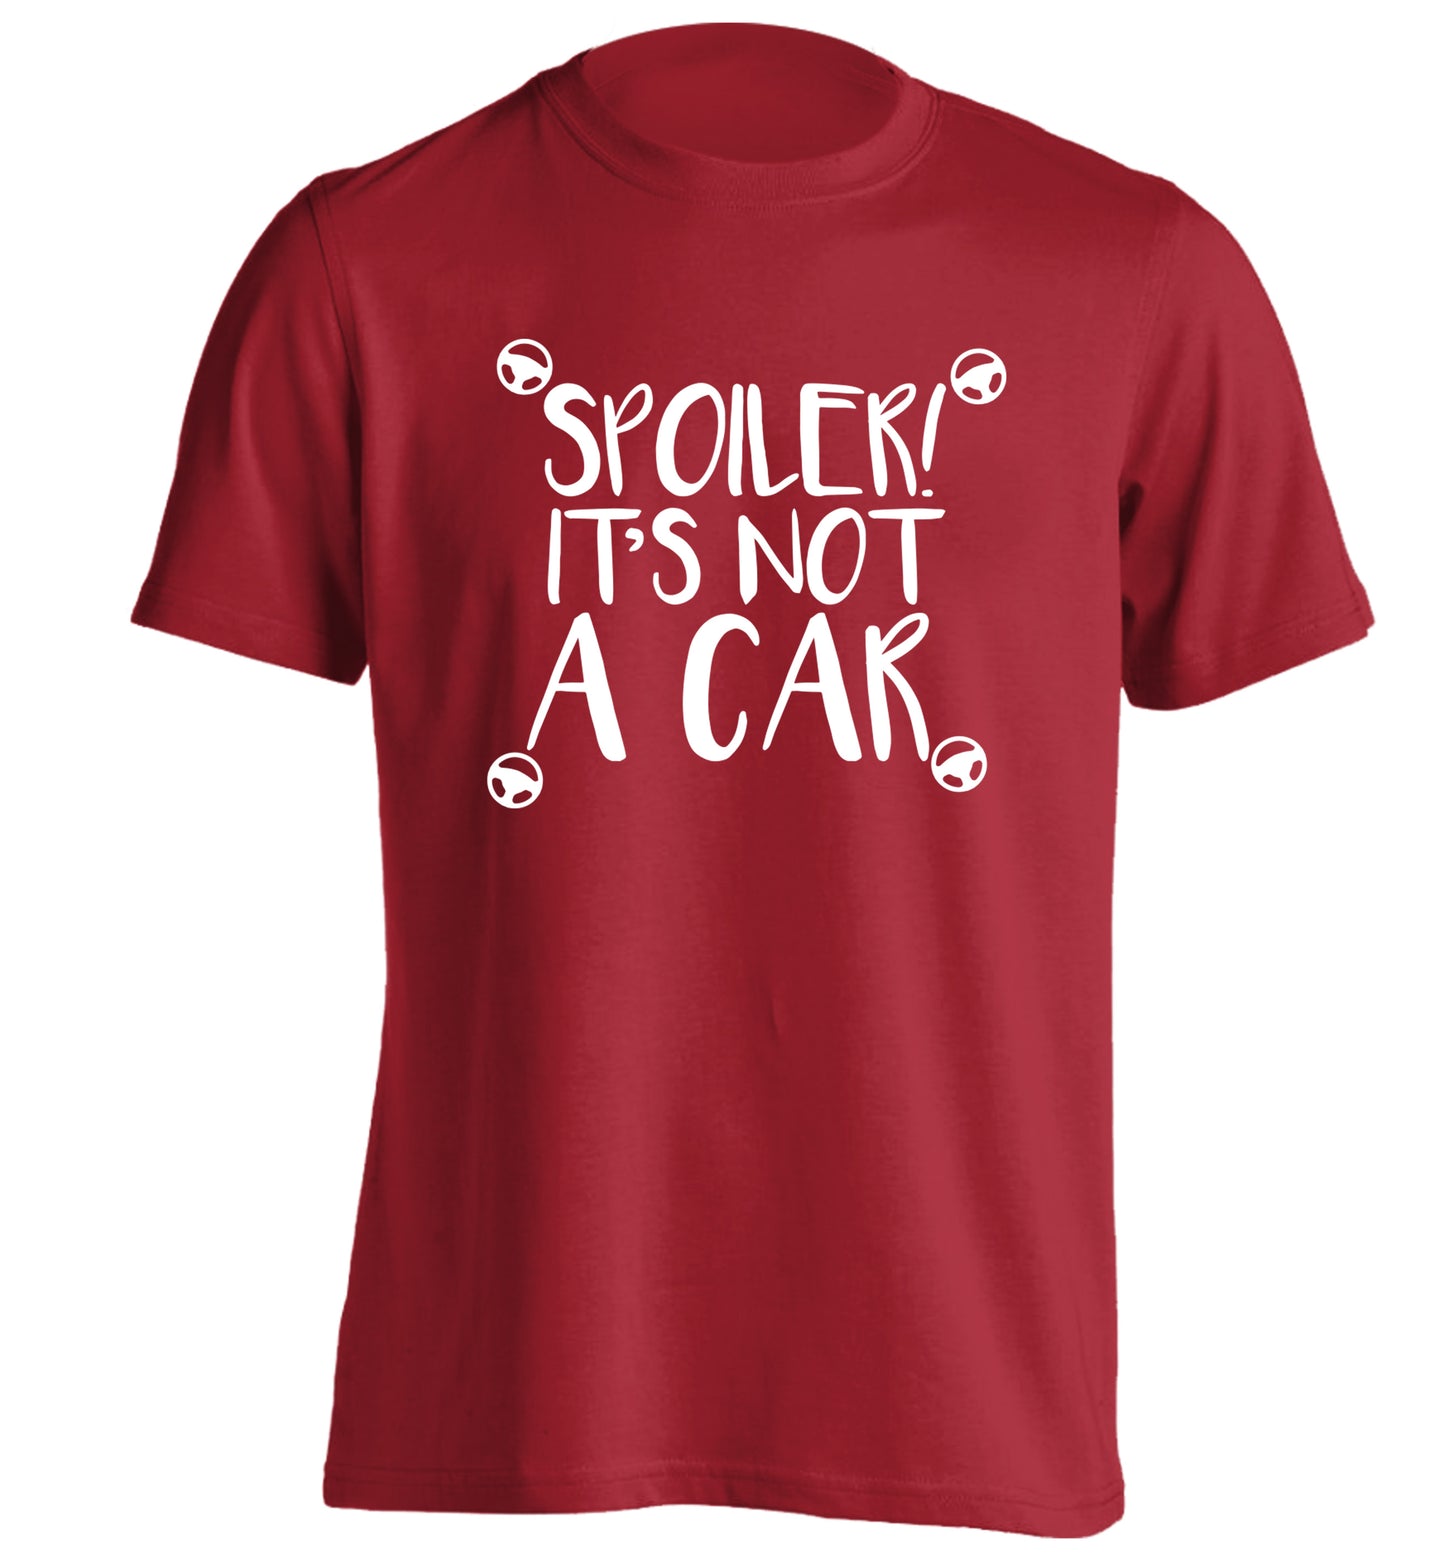 Spoiler it's not a car adults unisex red Tshirt 2XL